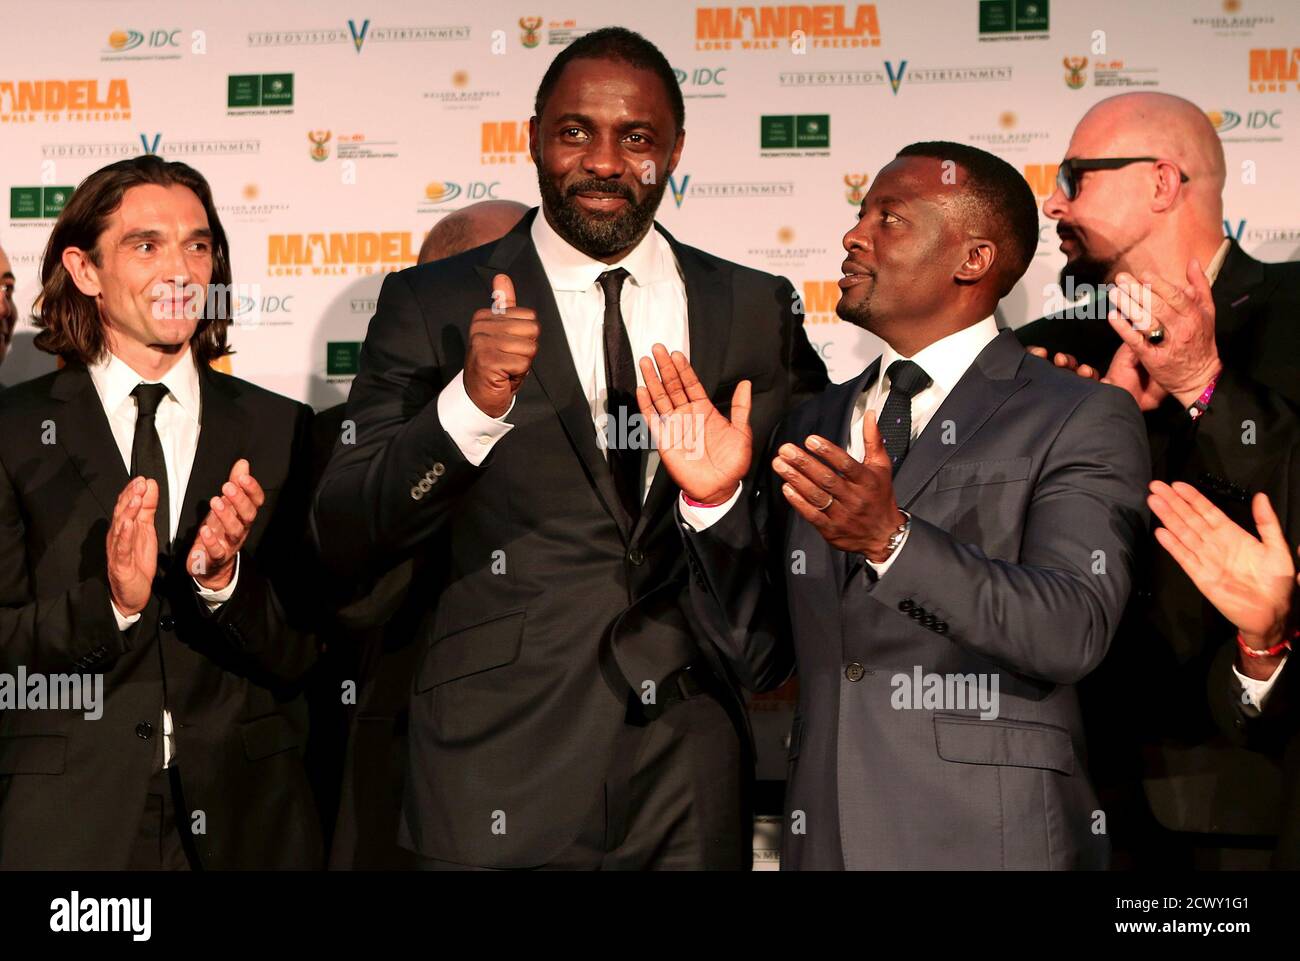 British actor Idris Elba (C), who plays former South African president Nelson Mandela in the movie 'Mandela: Long Walk to Freedom', gestures next to actor Tony Kgoroge who plays anti-apartheid activist Walter Sisulu, as British director Justin Chadwick (L) looks on, at the film's premiere in Johannesburg November 3, 2013. REUTERS/Siphiwe Sibeko (SOUTH AFRICA - Tags: POLITICS ENTERTAINMENT) Stock Photo